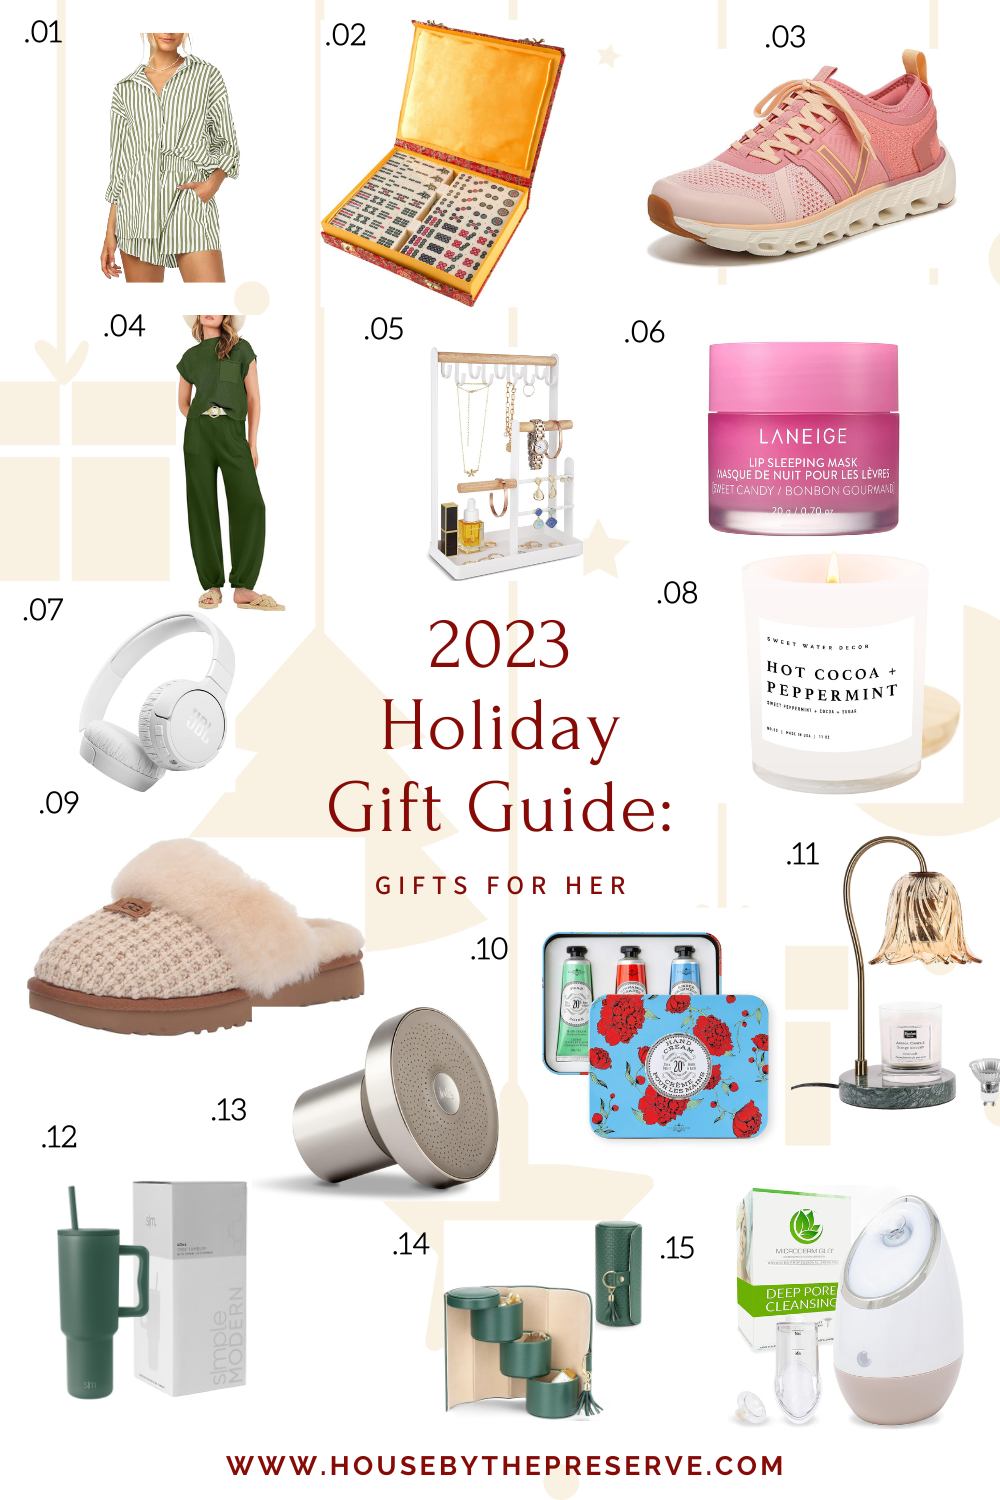 2022 Holiday Gift Guide: Home and Kitchen — House by the Preserve